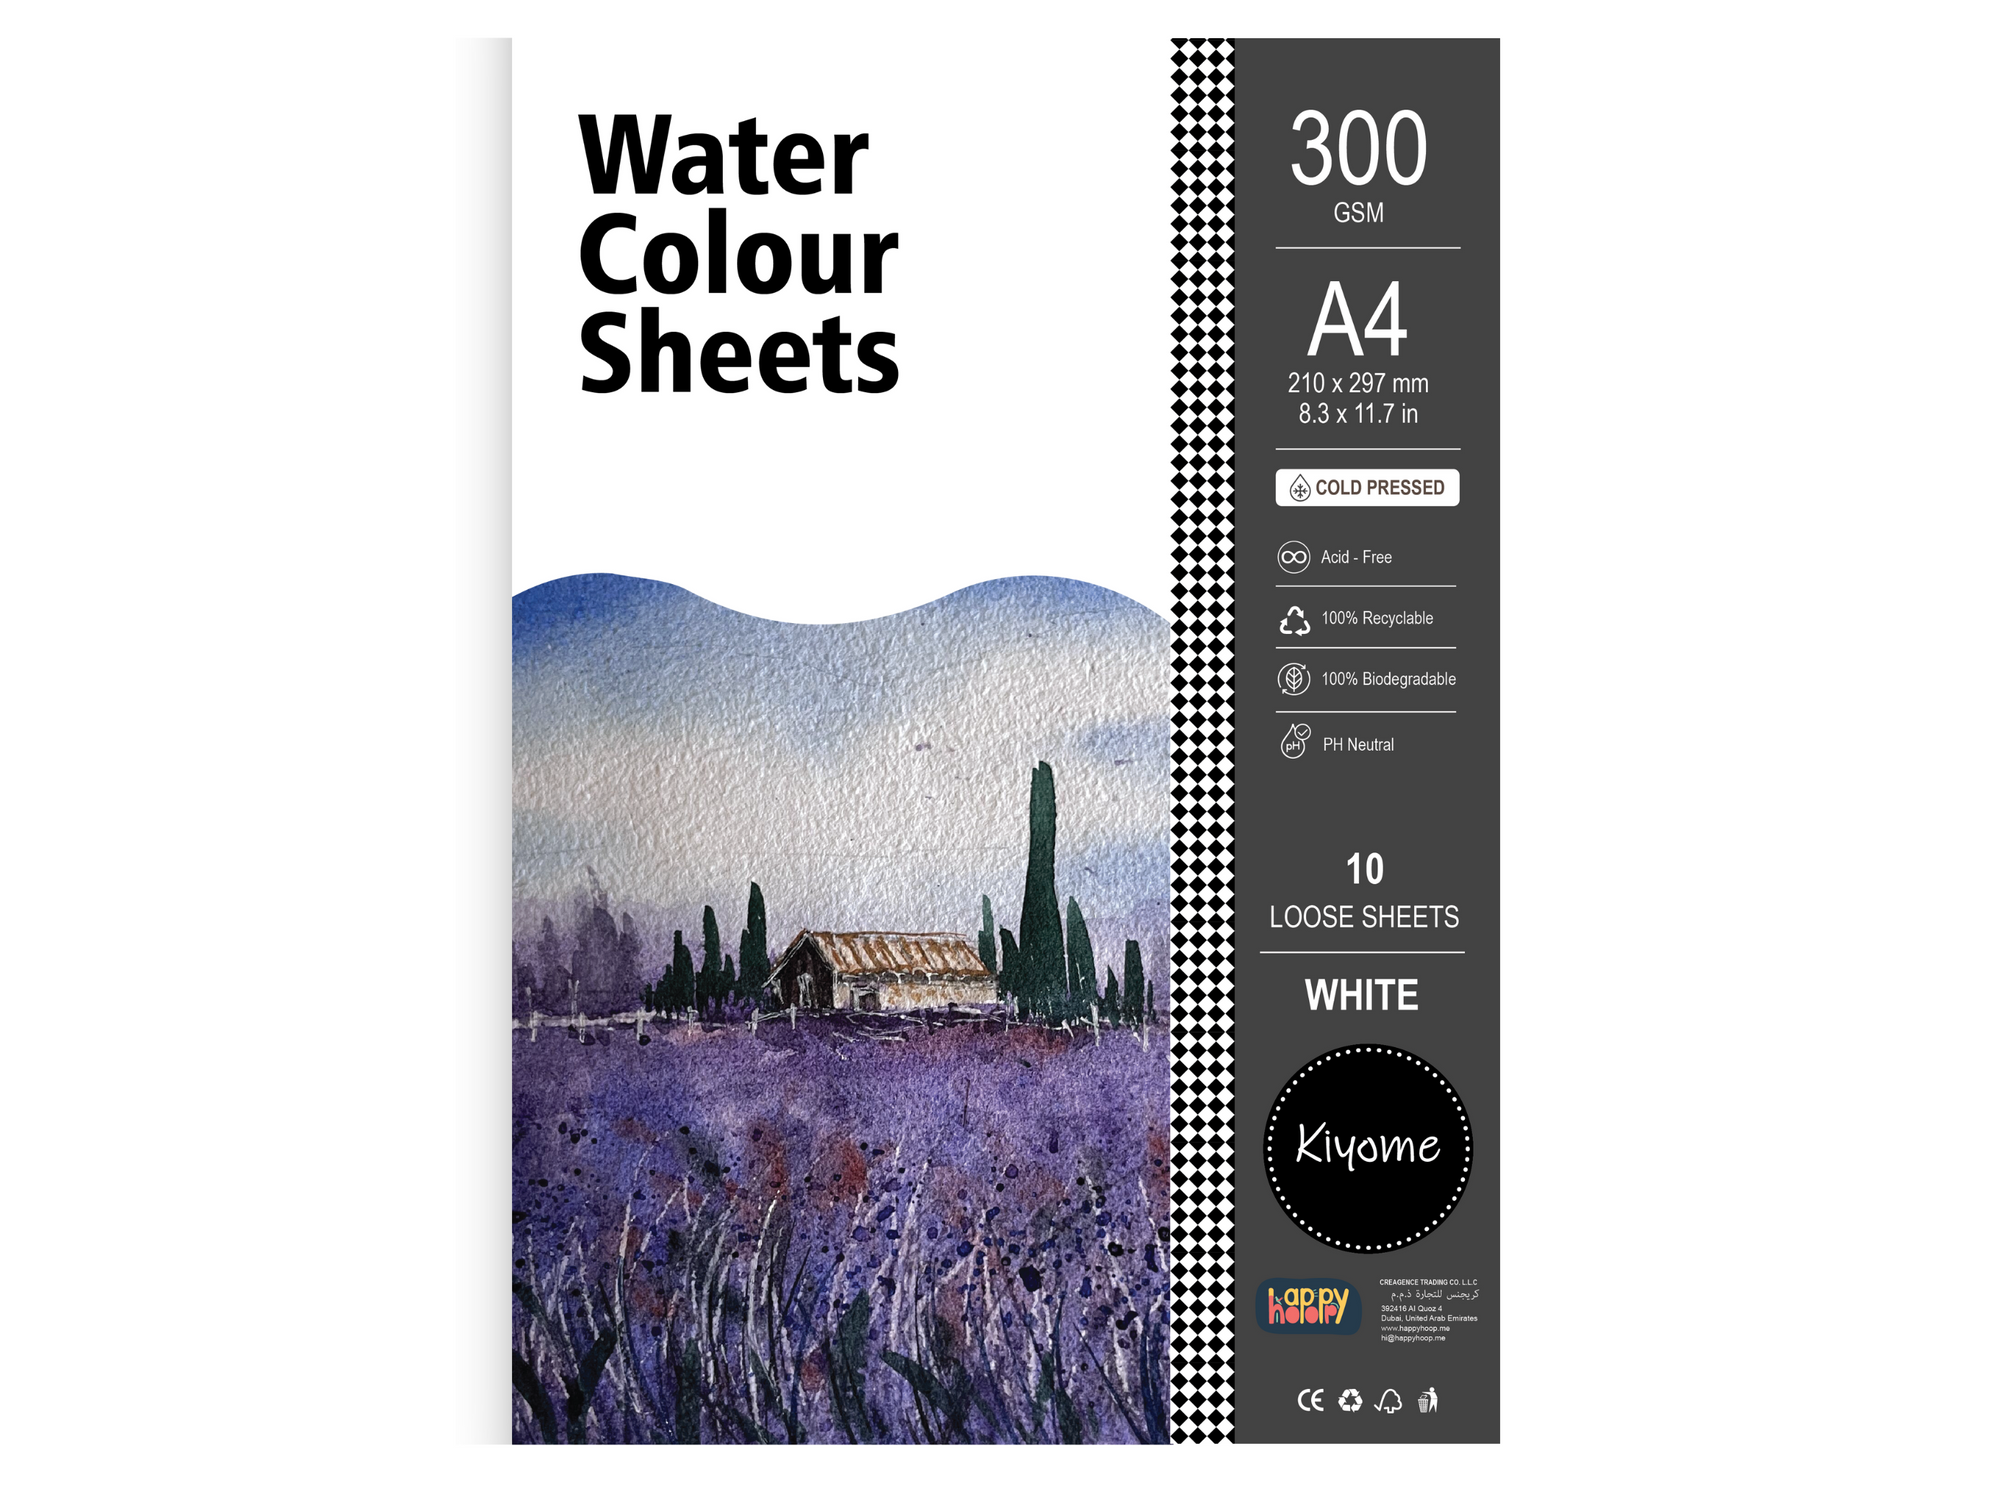 Kiyome Watercolour Sheets | Cold Pressed | 300 GSM | A6 | 40 Sheets